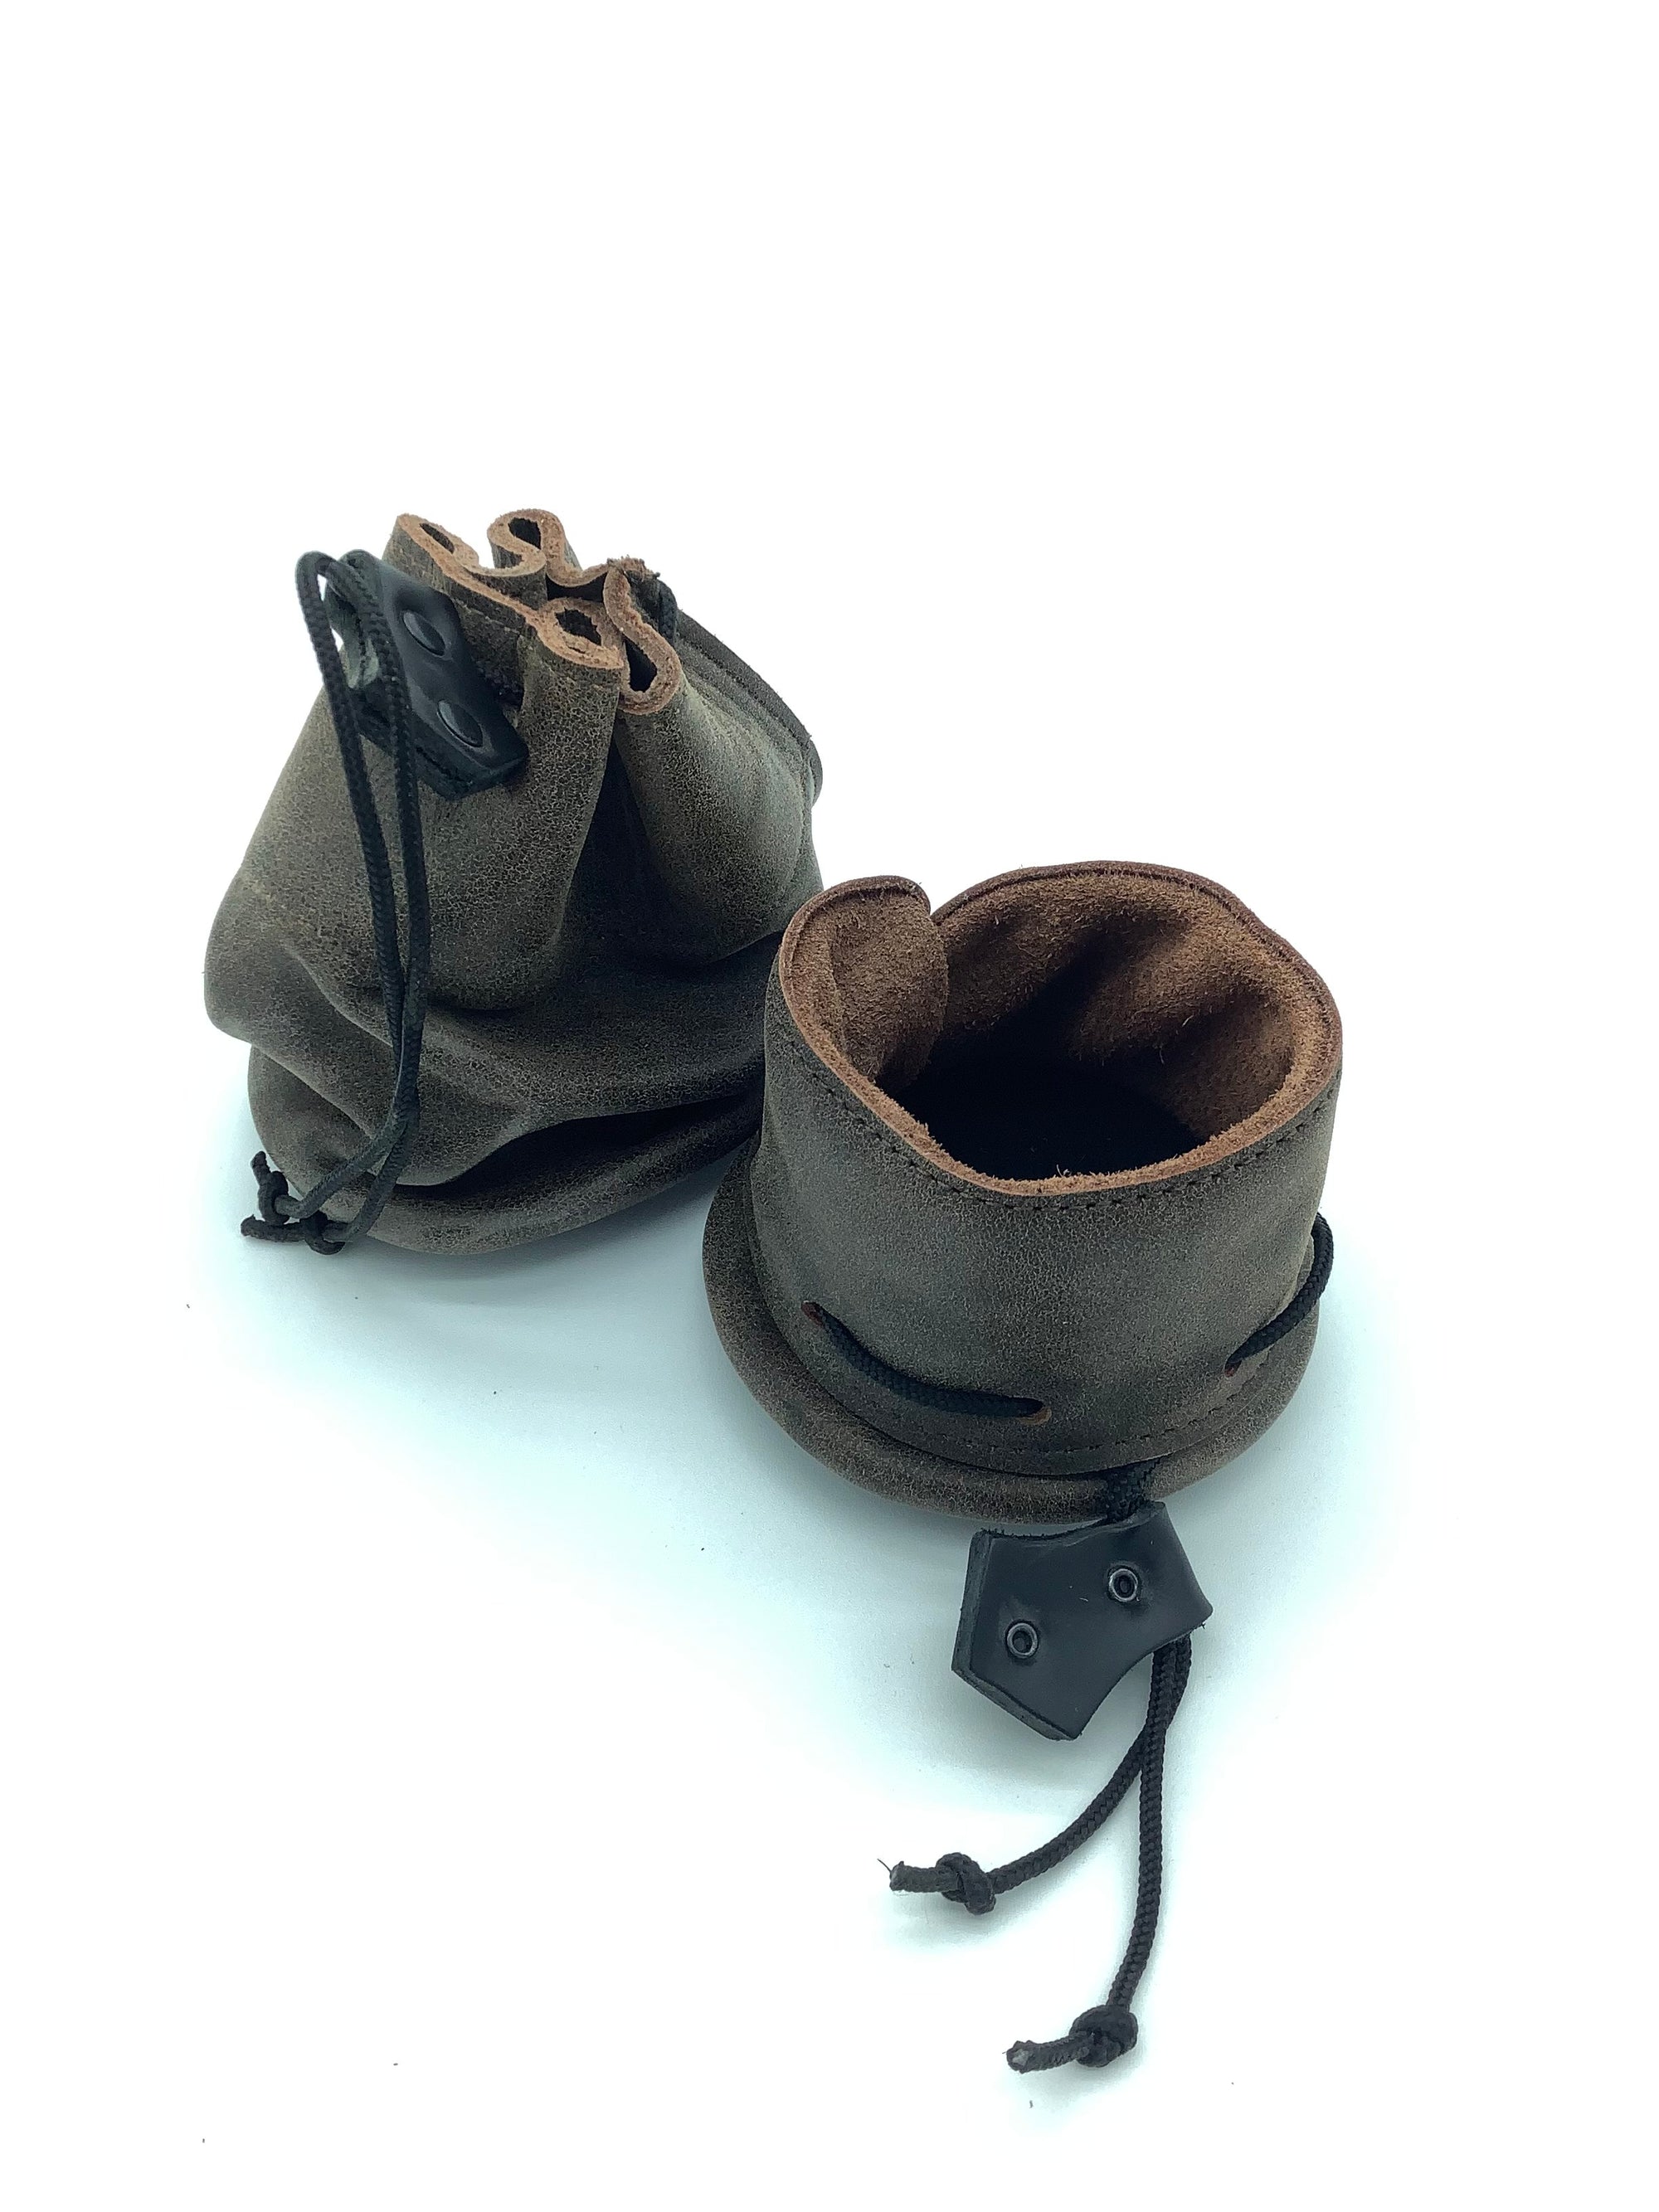 Brown Leather Dice Bag / Dice Cup Transformer